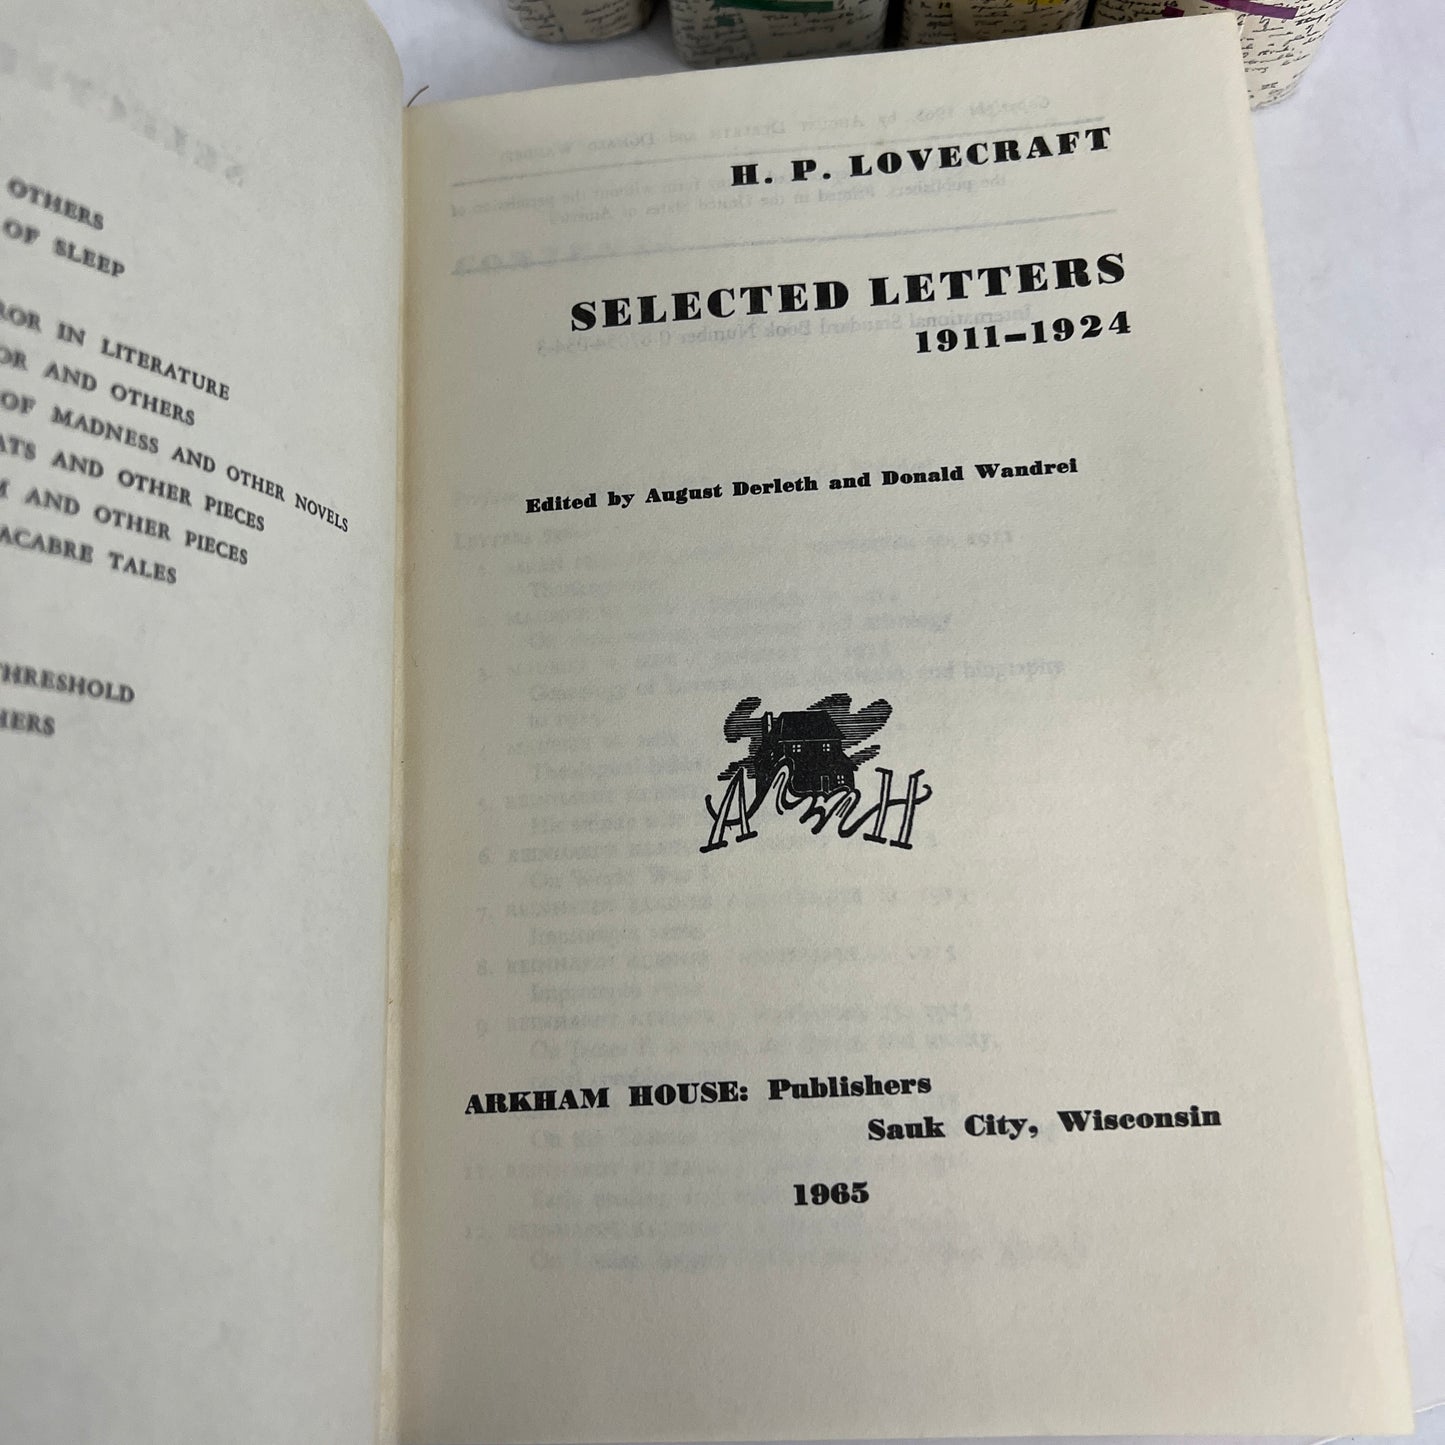 Selected Letters of H.P. Lovecraft (I-V Complete)